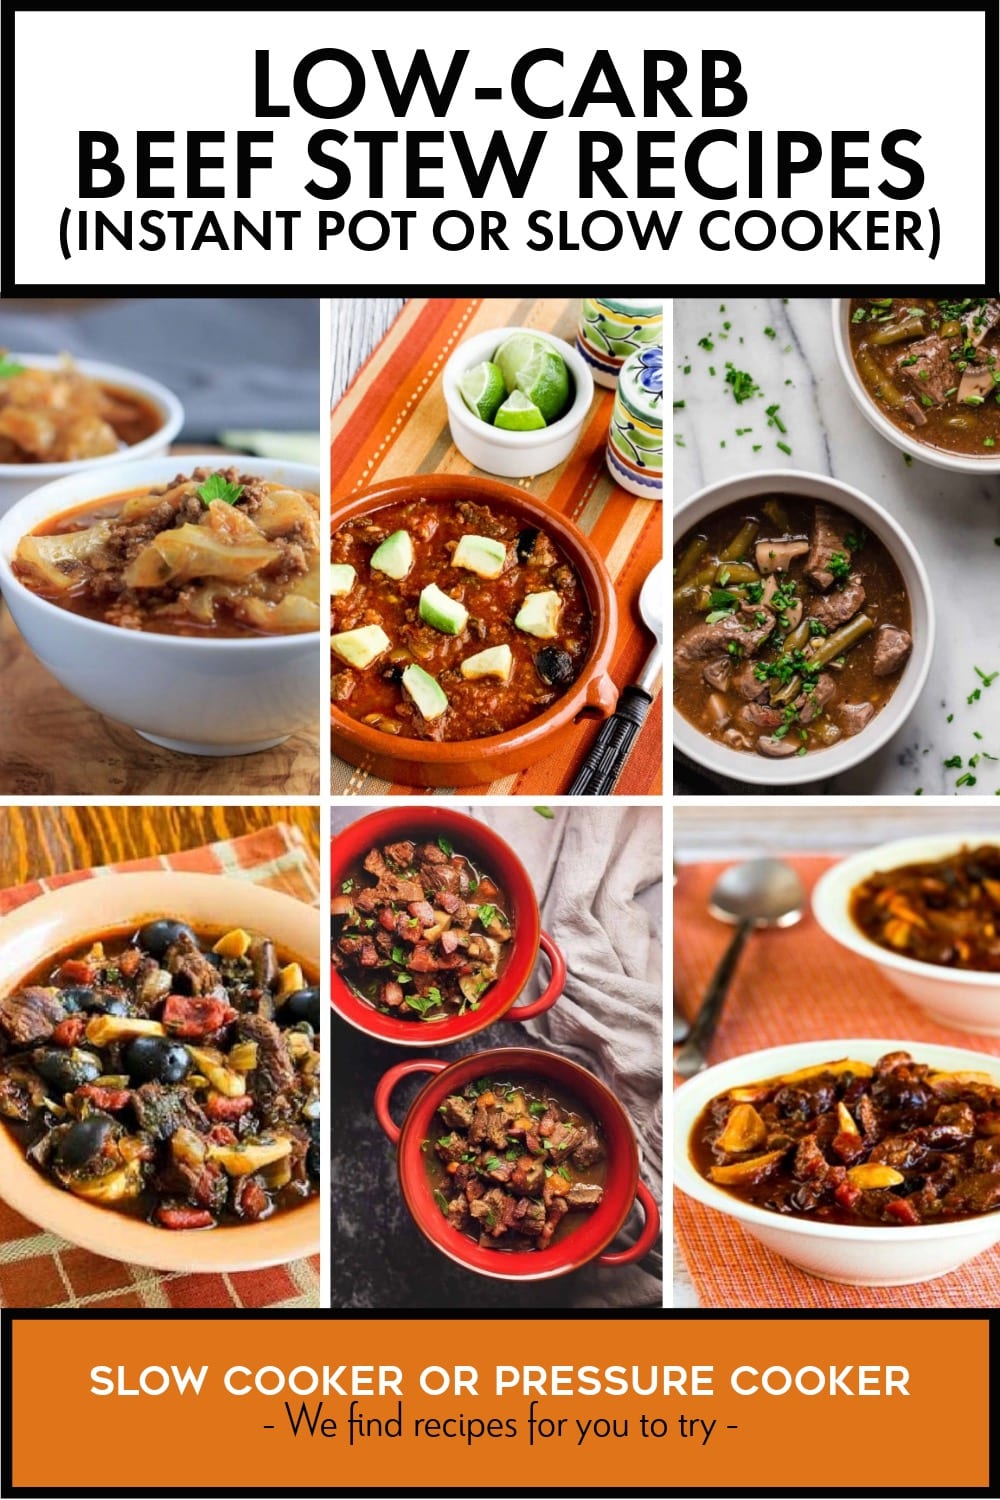 Pinterest image of Low-Carb Beef Stew Recipes (Instant Pot or Slow Cooker)